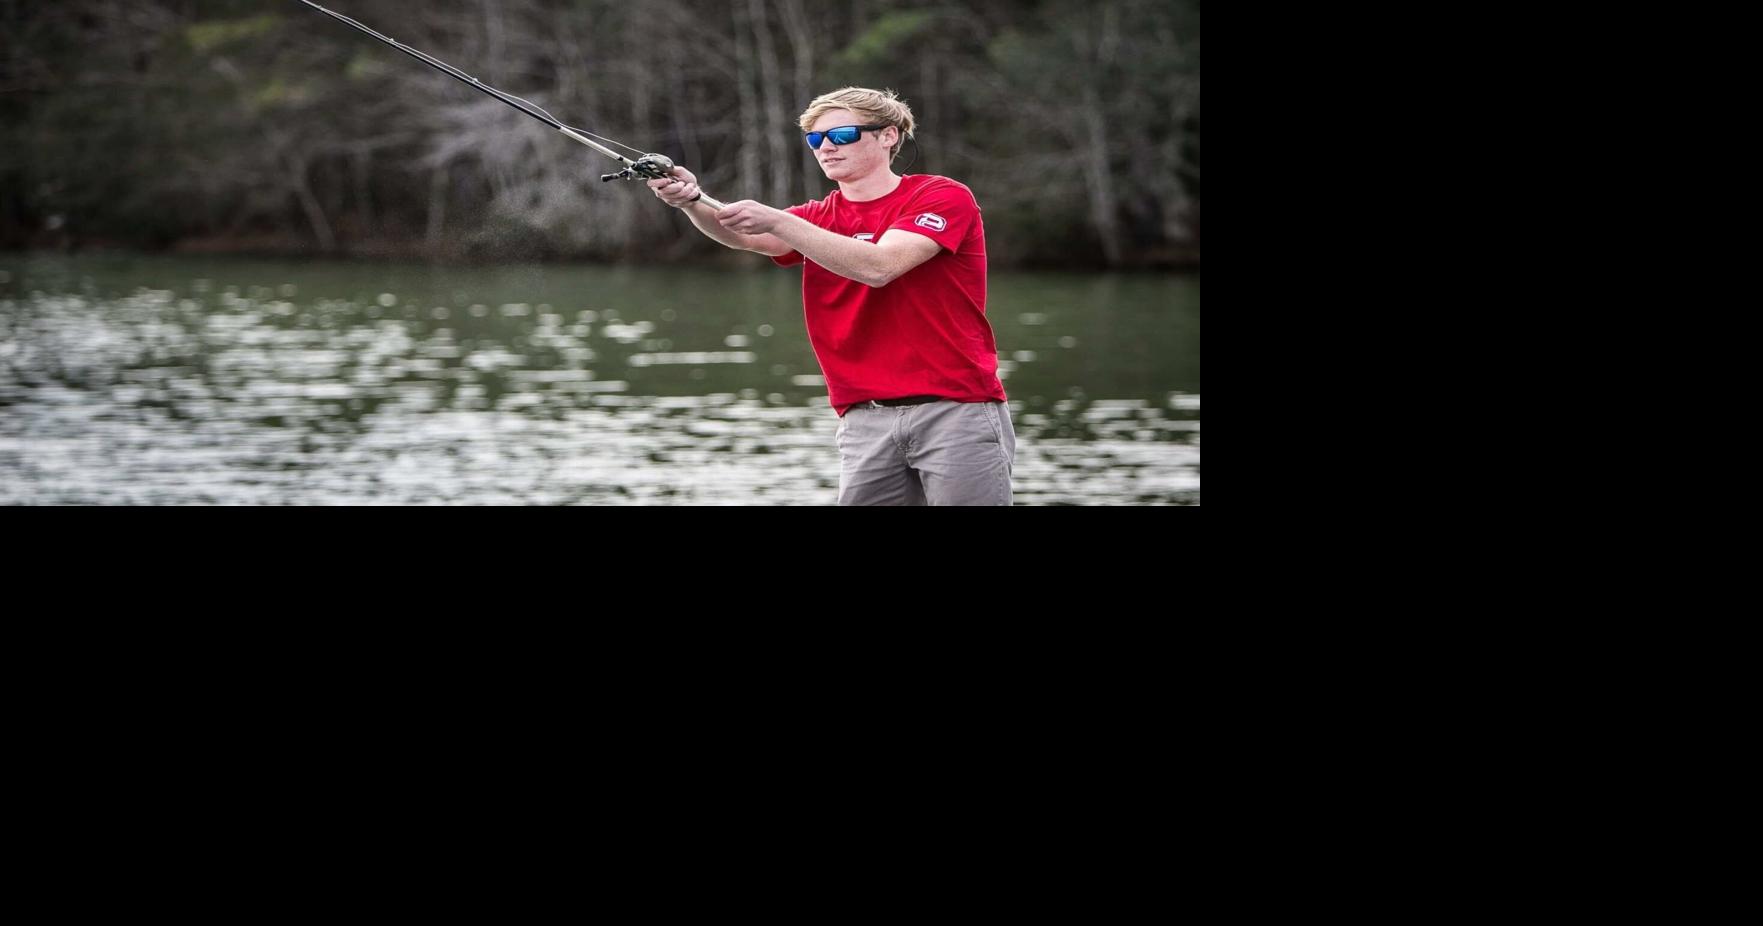 Fishing - Fishing Reels - Fly Reels - Yeager's Sporting Goods